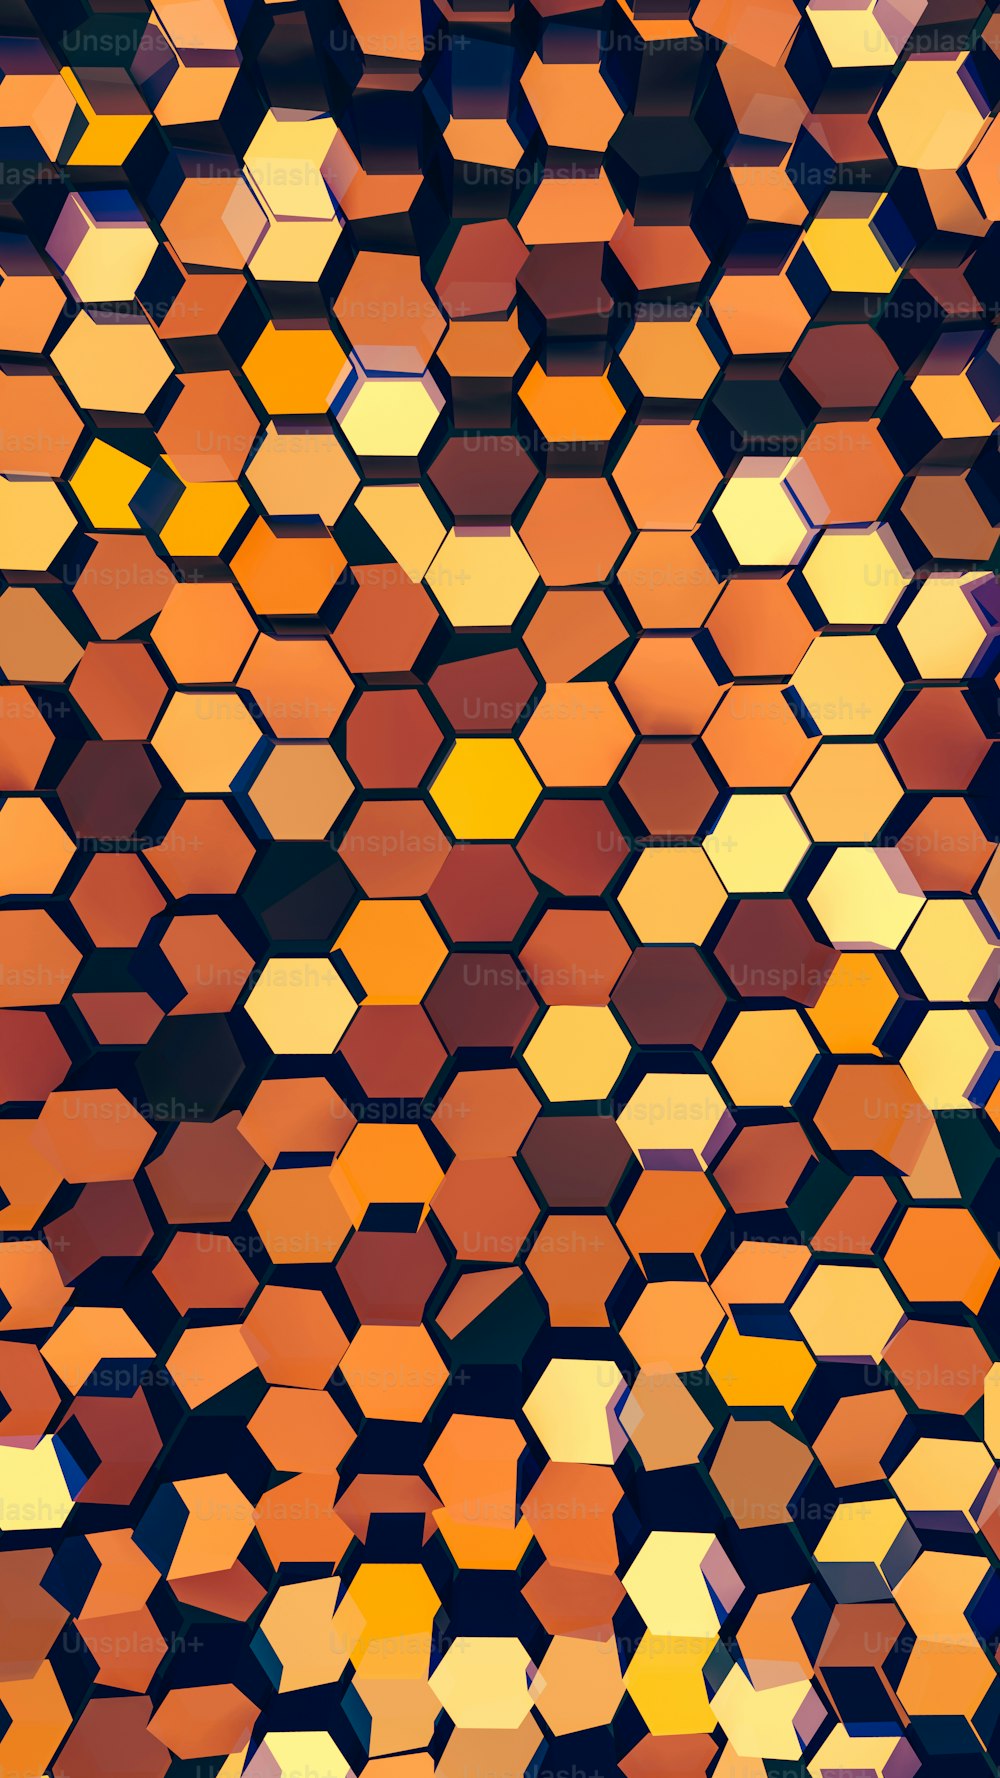 an abstract pattern of hexagonal shapes in orange and yellow